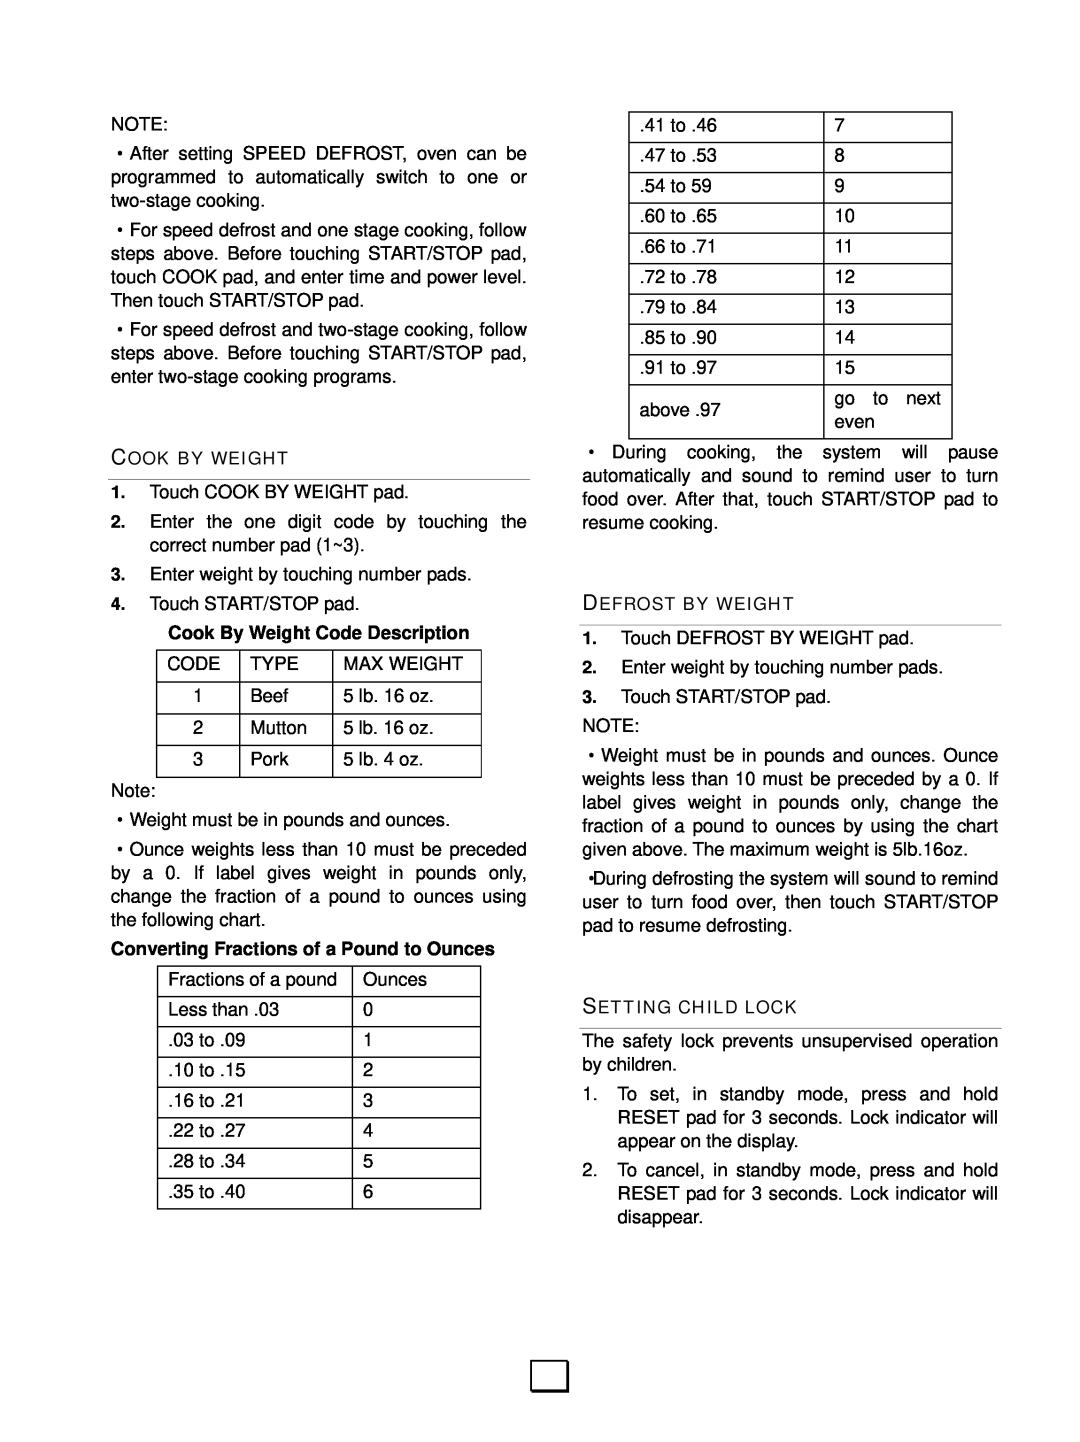 RCA RMW1156 owner manual Cook By Weight Code Description, Converting Fractions of a Pound to Ounces, Defrost By Weight 